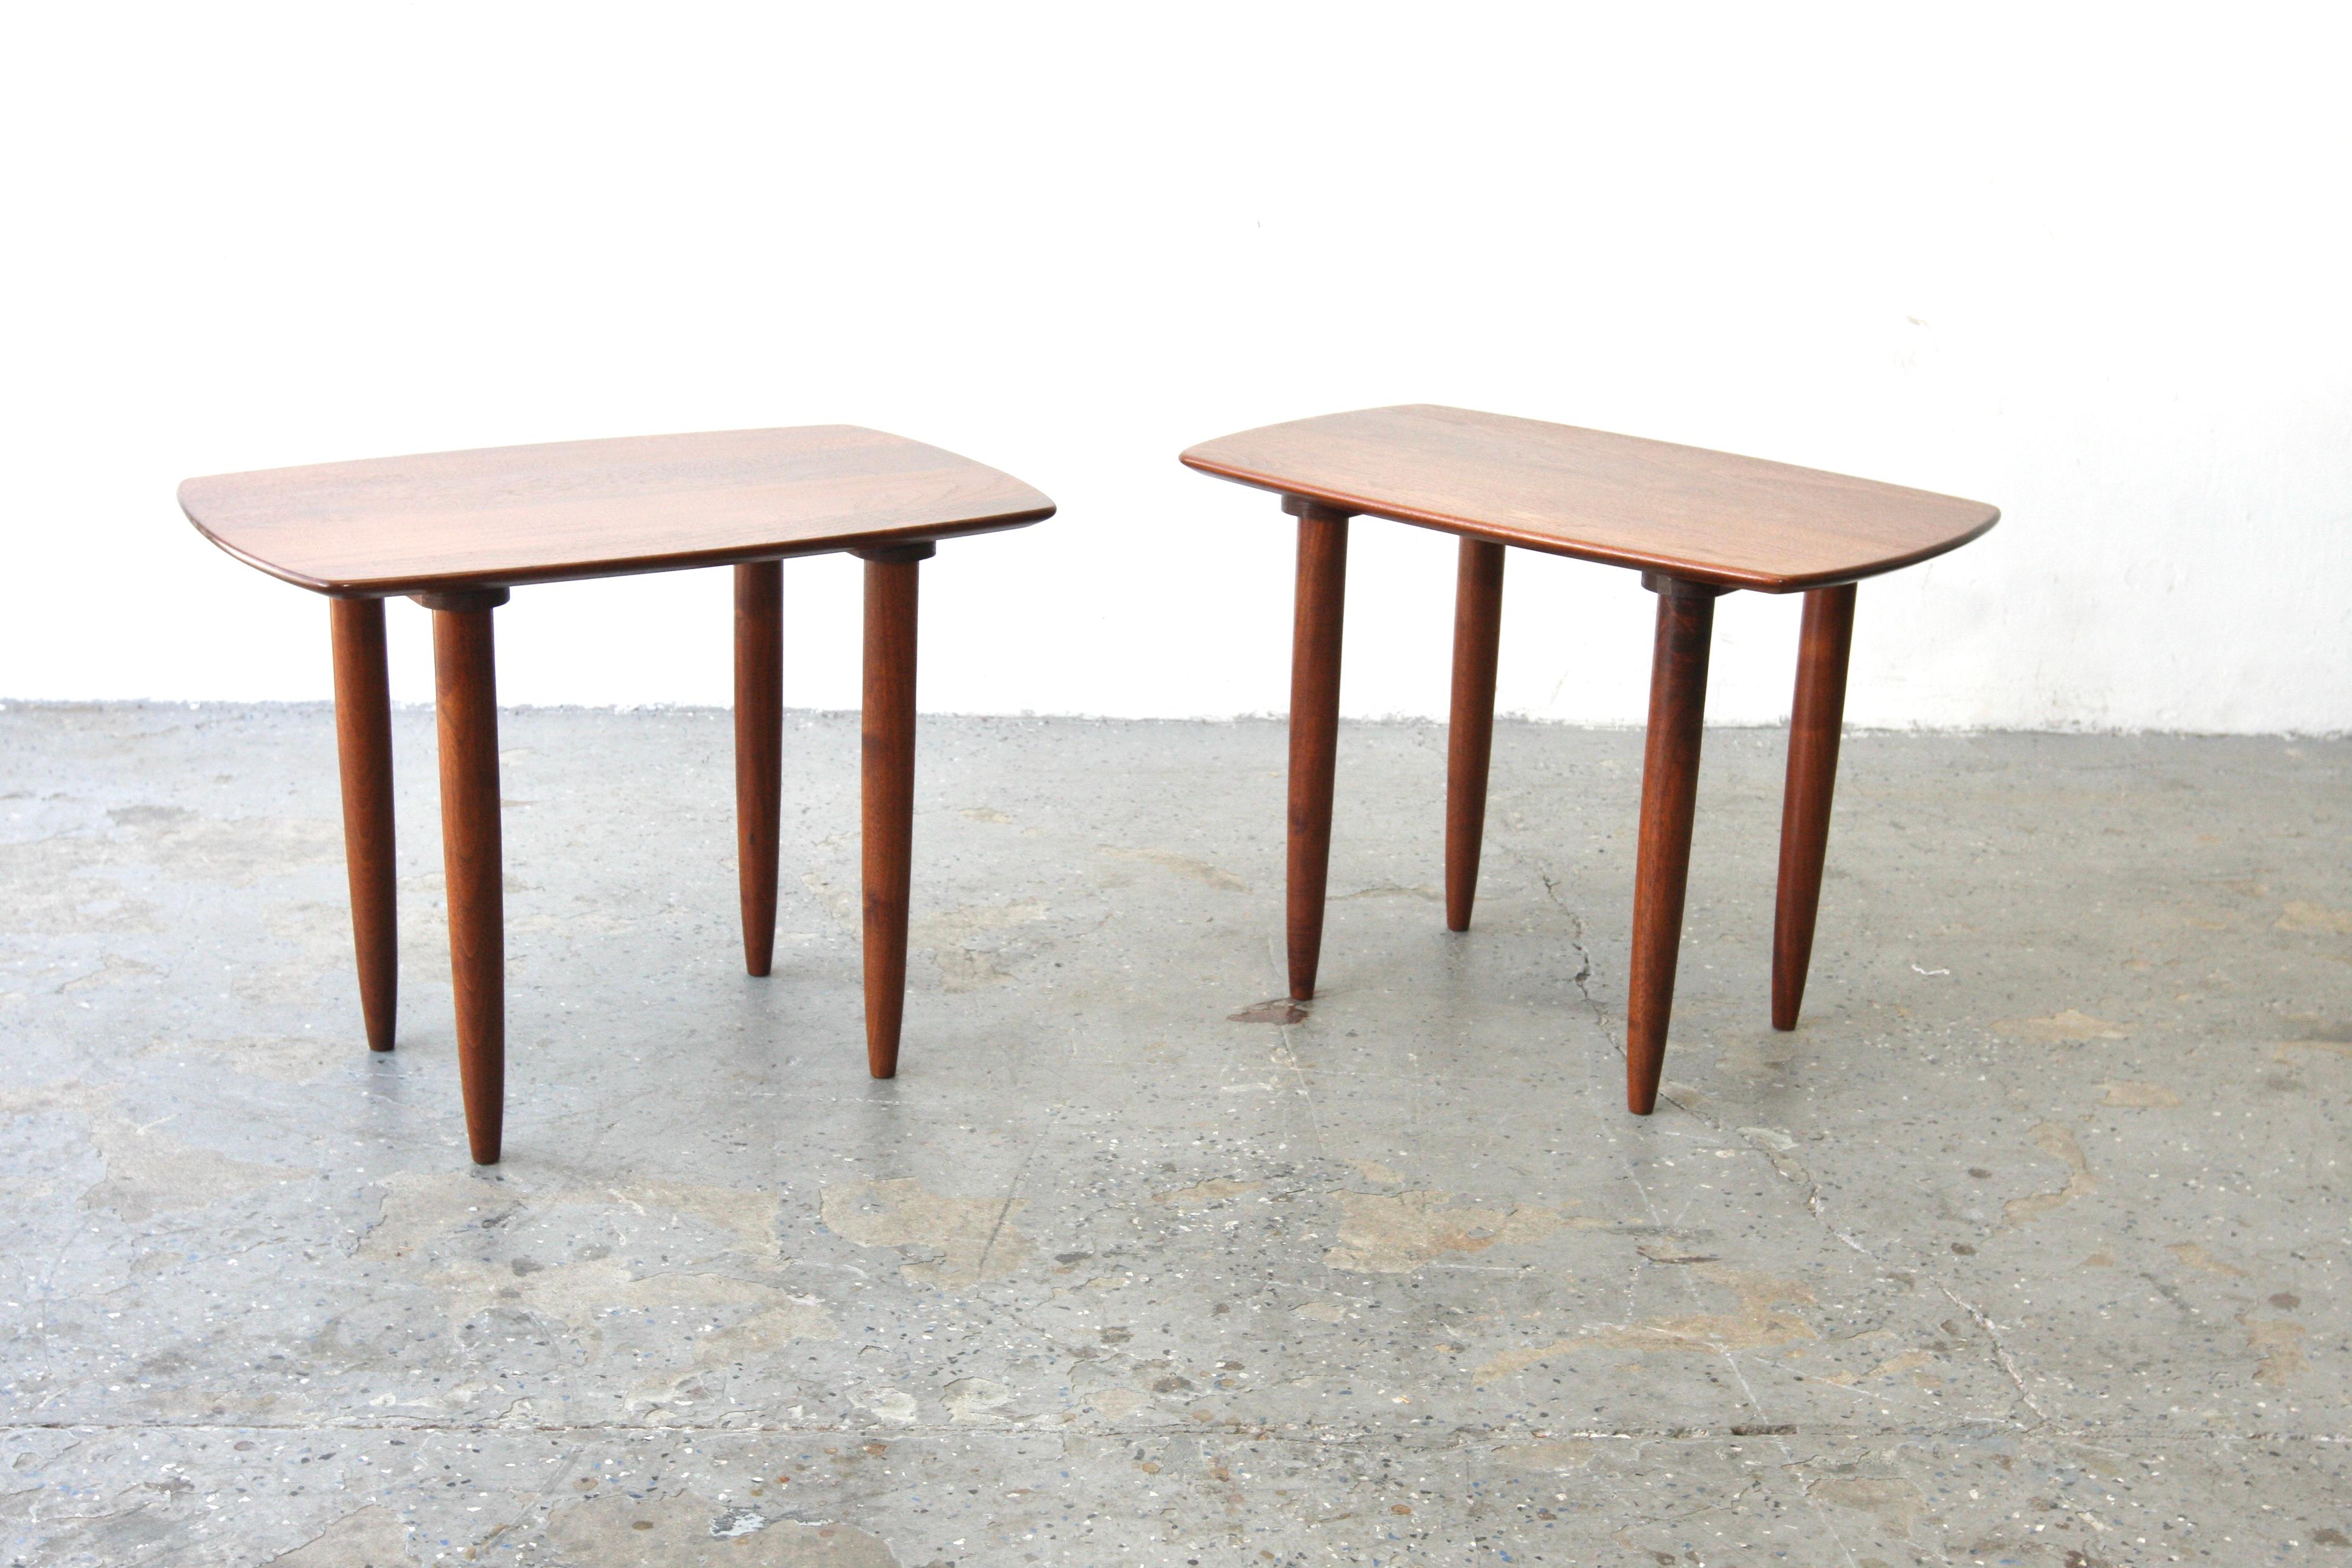 Pair of  Solid Walnut Danish modern side tables in the style of Peter Hivdit


Produced by Ace-Hi of Gardena, Calif., the Prelude line of furniture featured solid walnut construction and simplified (but never reductive) purity of form. This Prelude